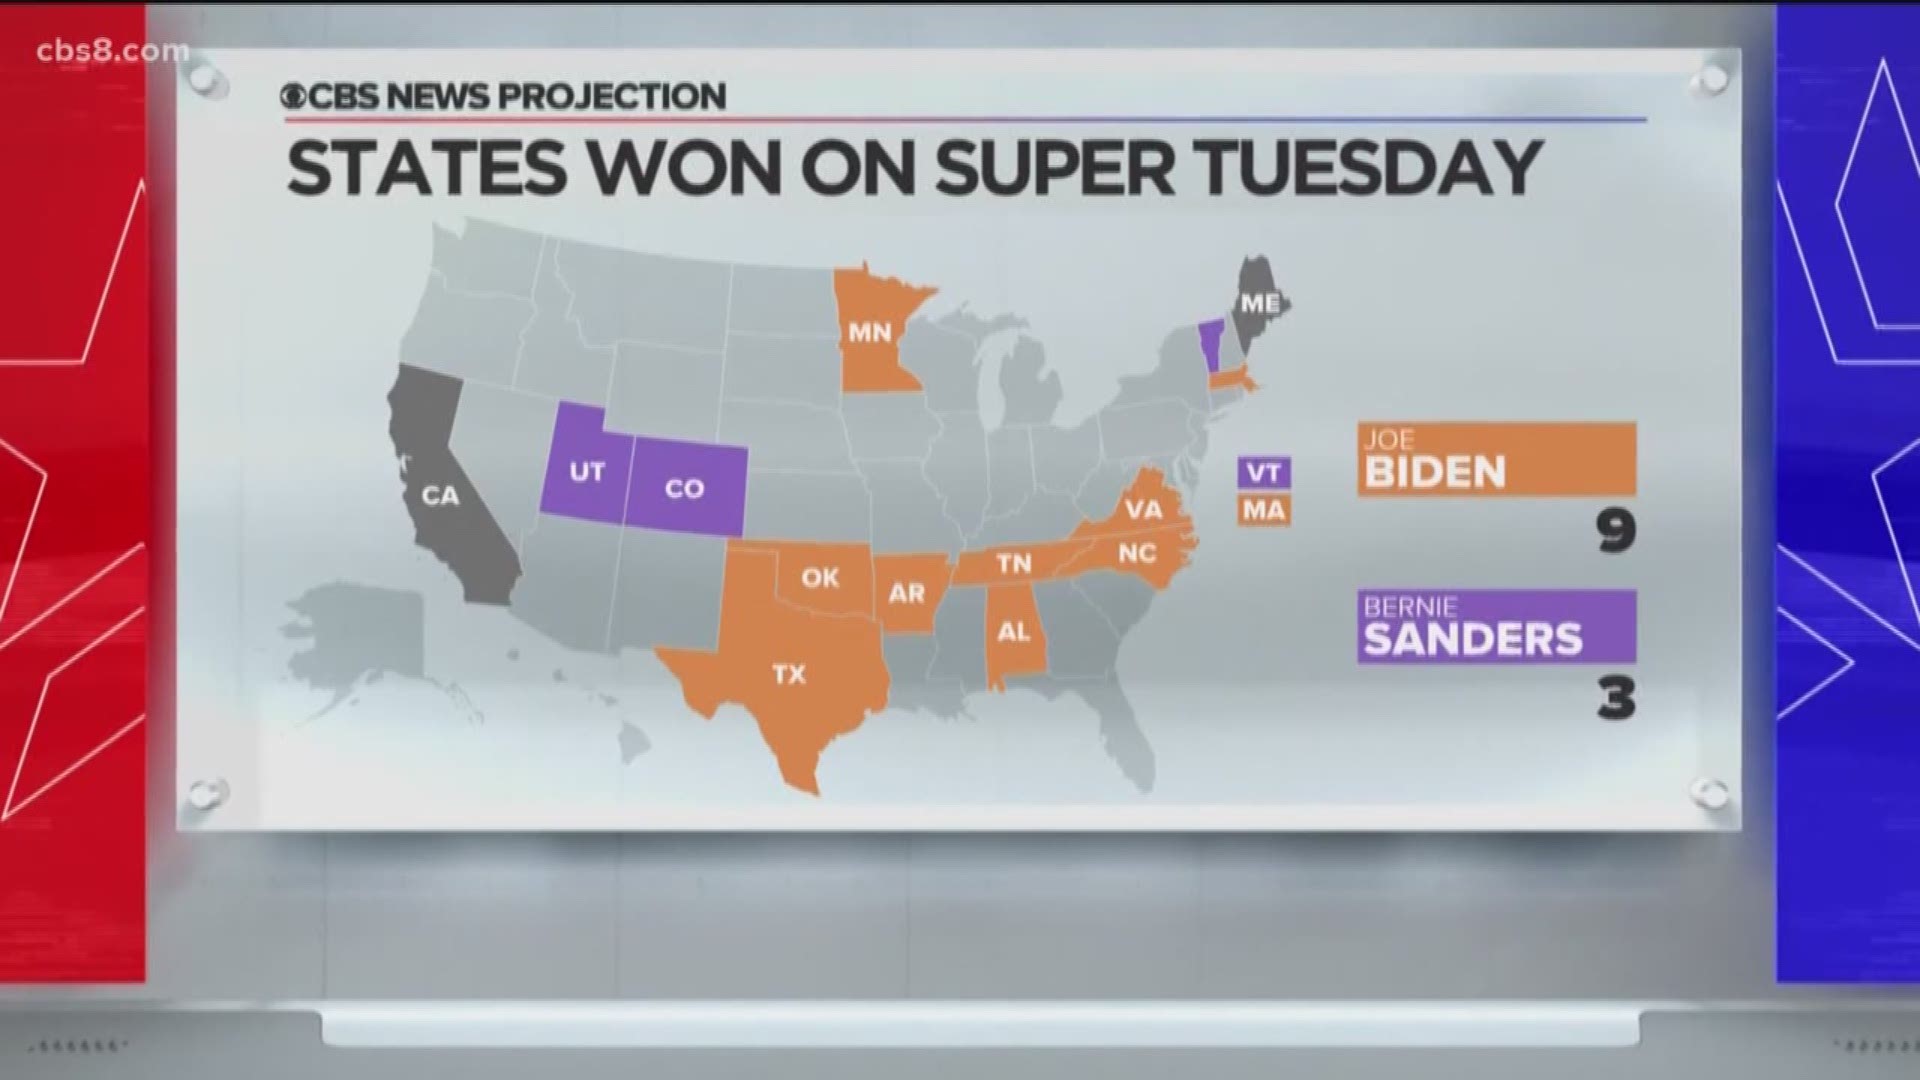 California is the crown jewel of Super Tuesday and was not expected to report final results until early Wednesday.